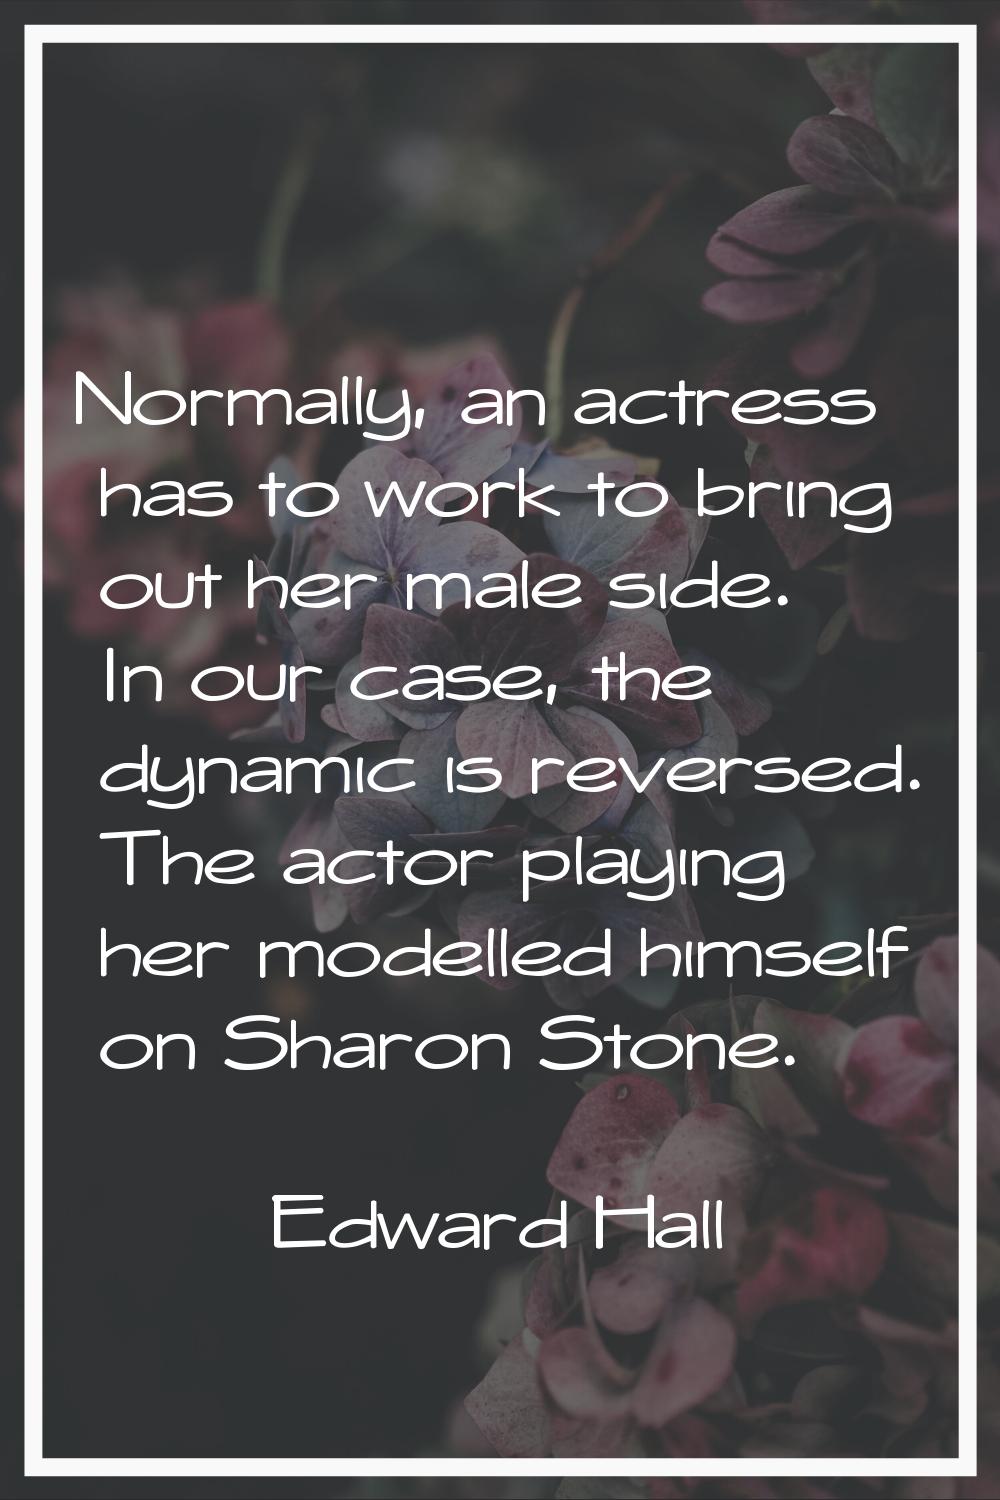 Normally, an actress has to work to bring out her male side. In our case, the dynamic is reversed. 